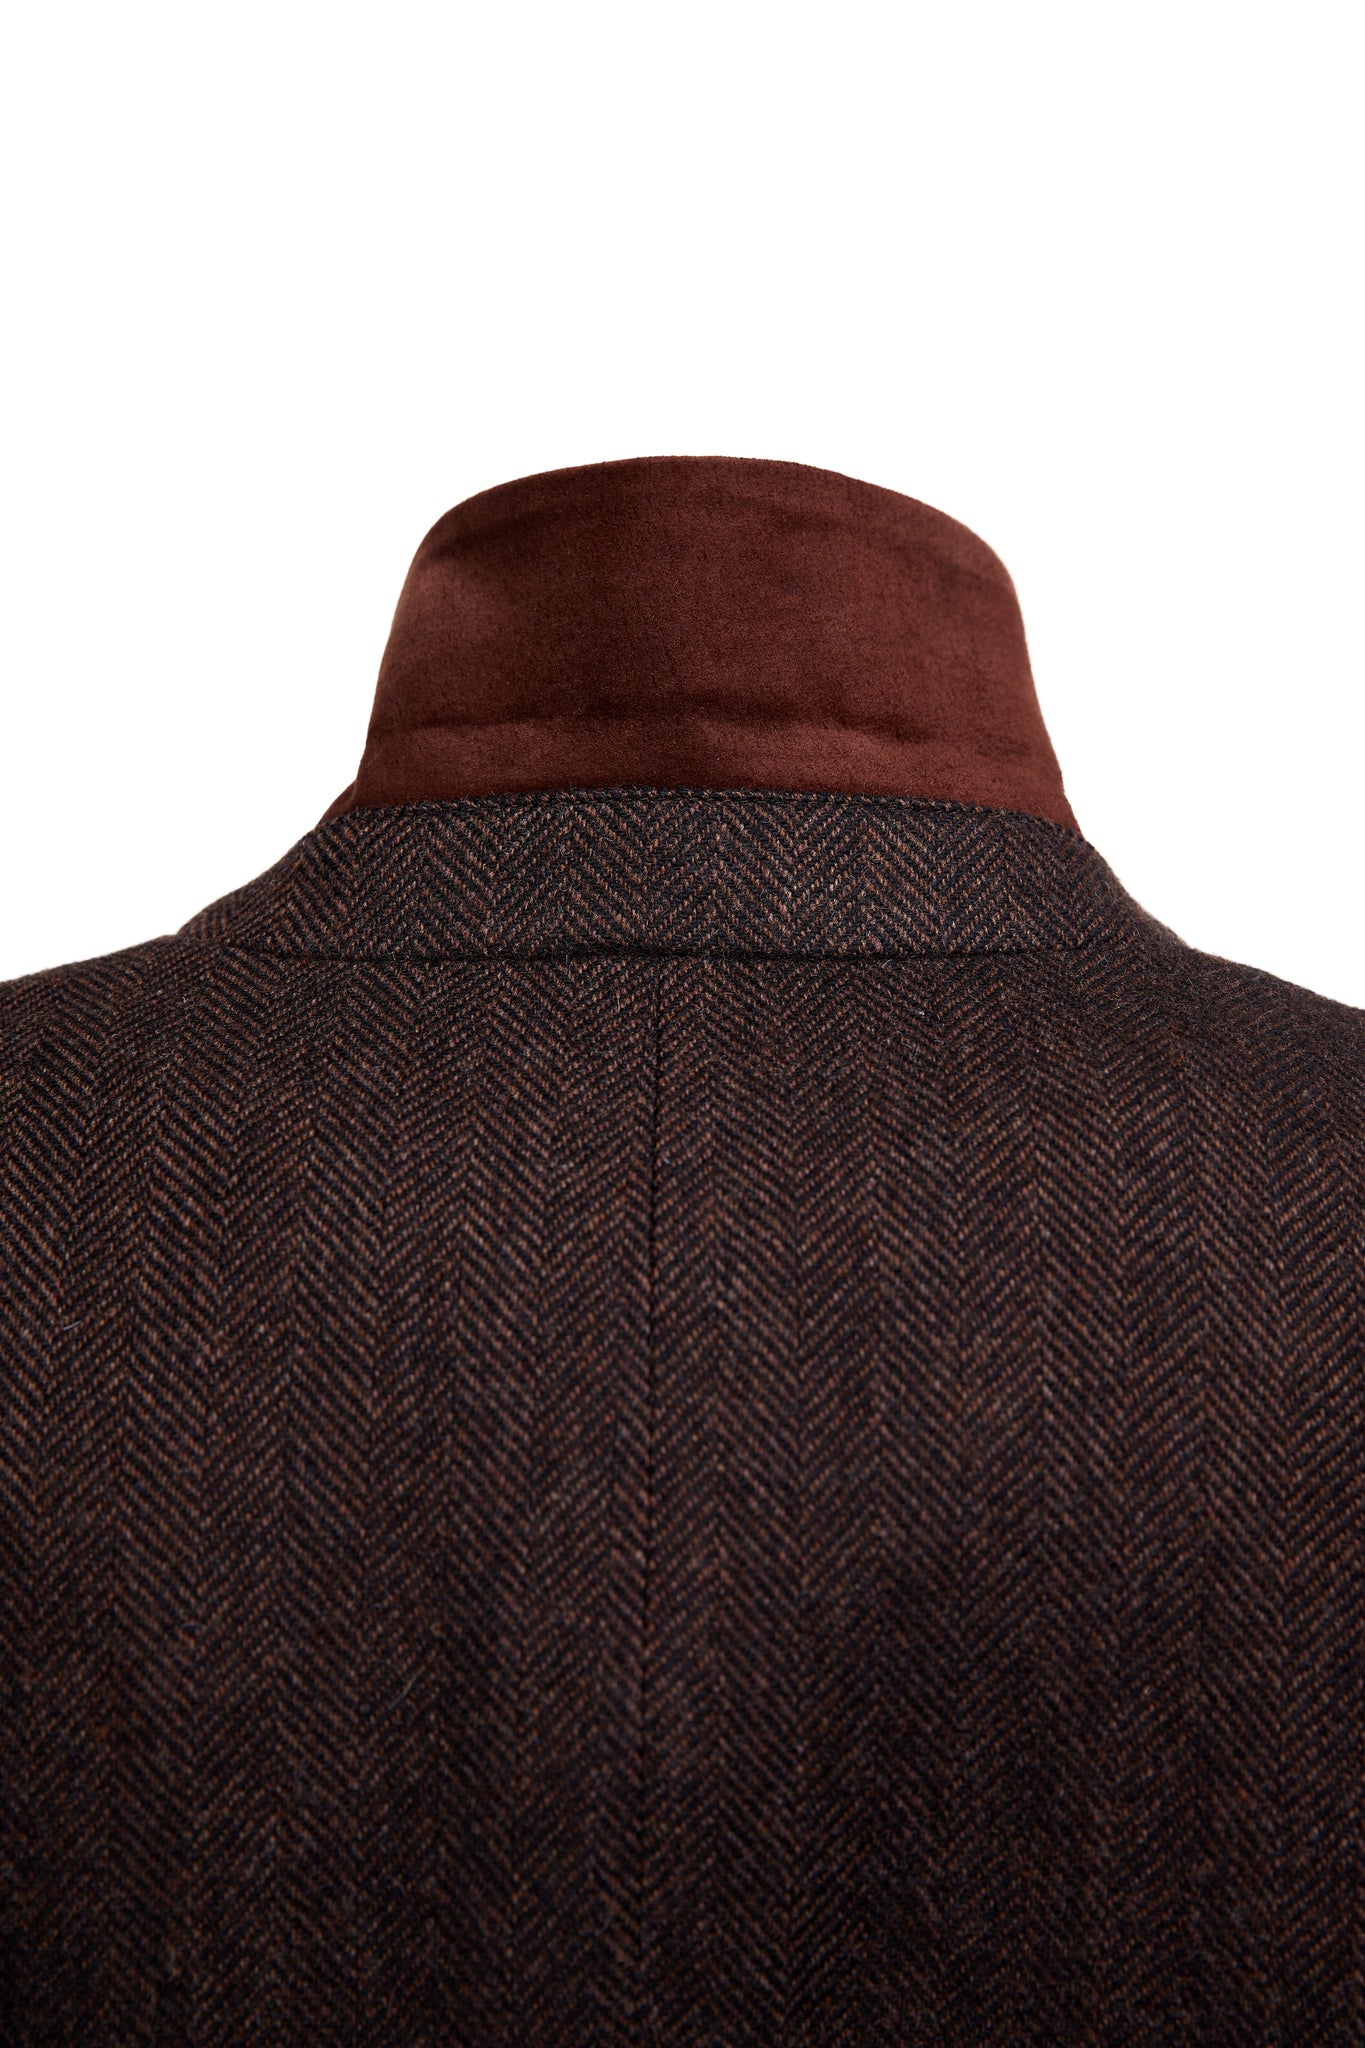 collar detail with brown suede on womens dark brown herringbone tweed mid-length single breasted coat detailed with gold hardware